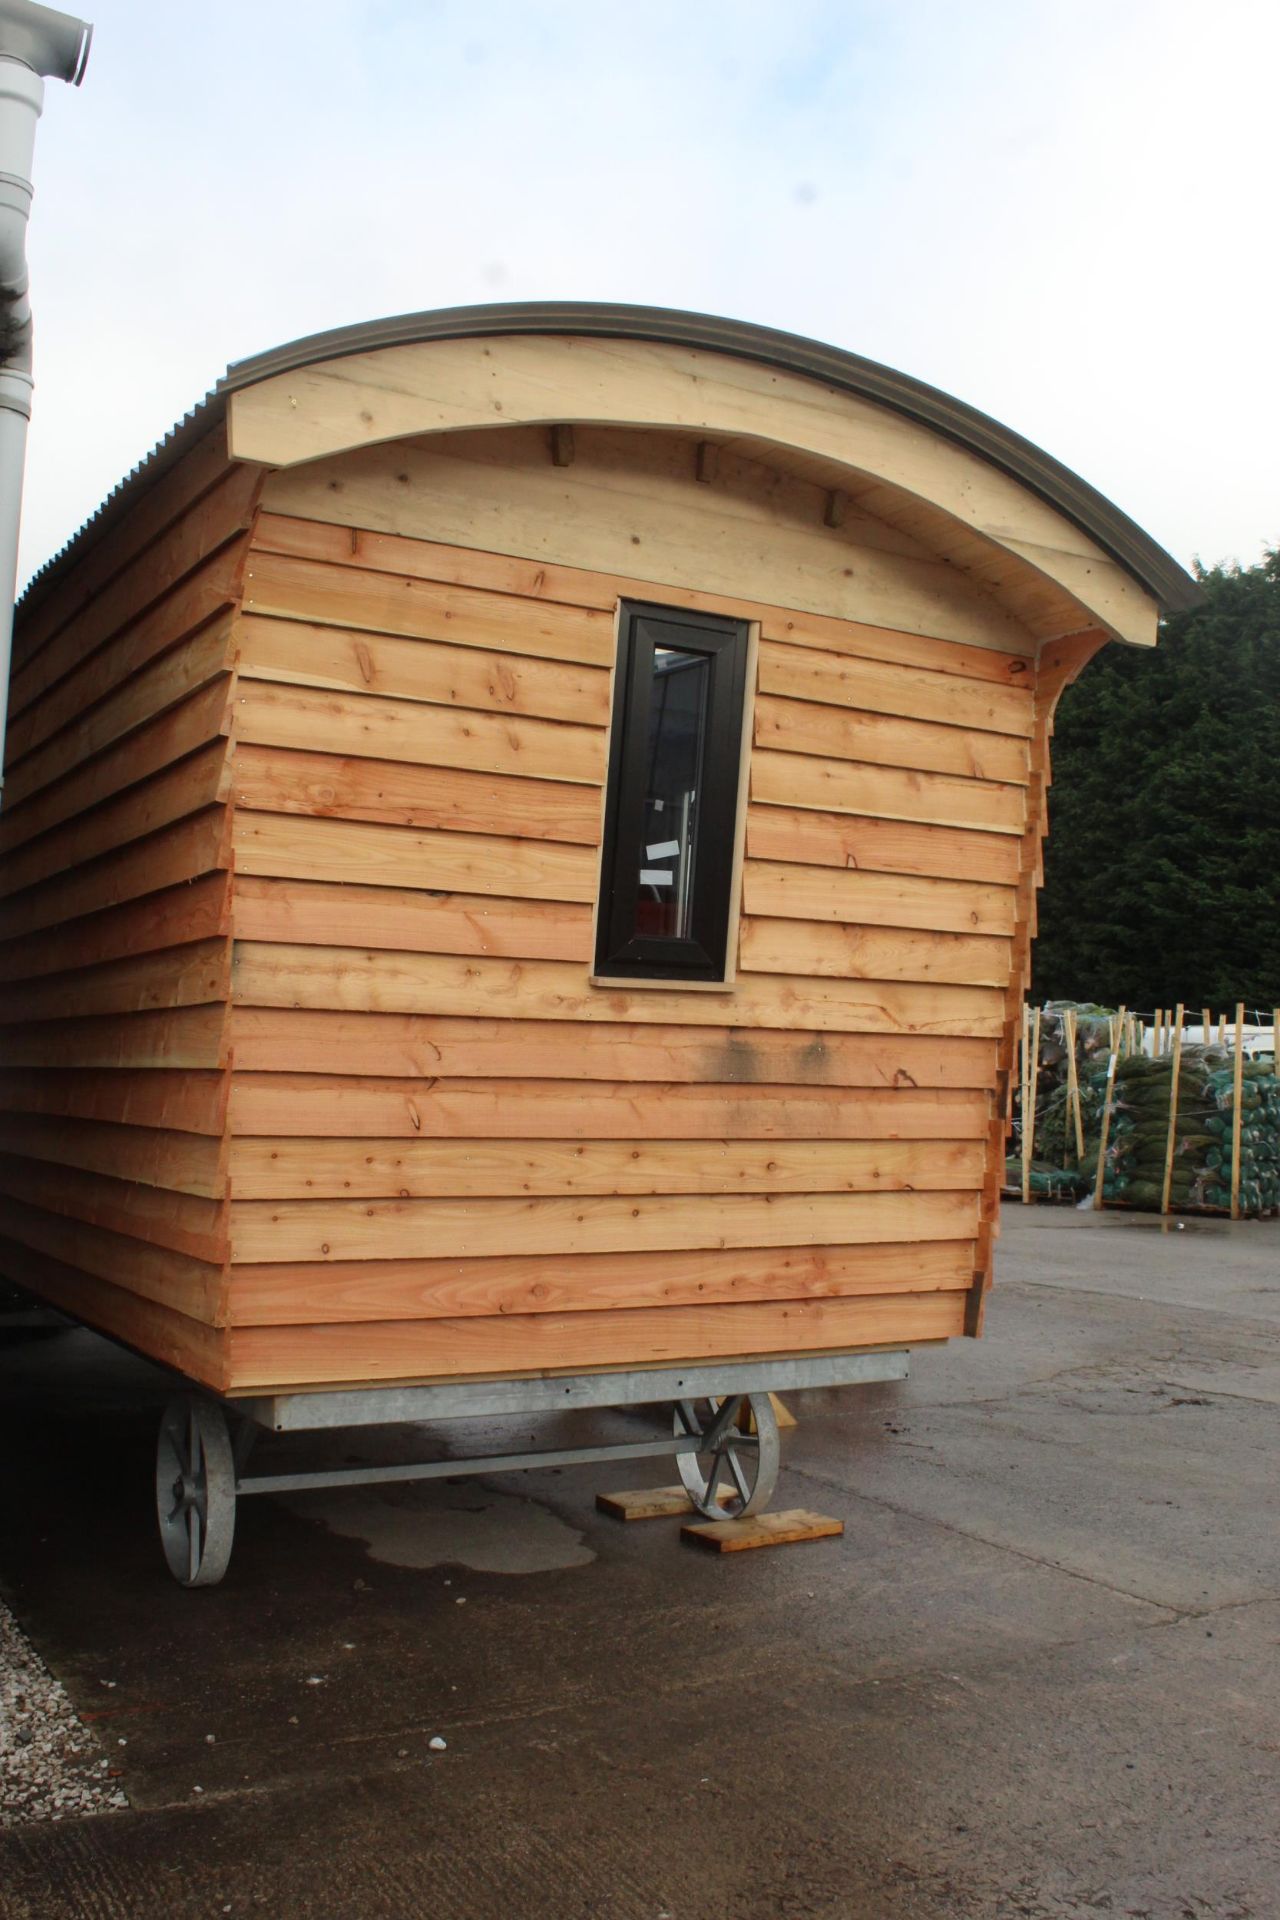 BRAND NEW EXTRA STRONG SHEPHERD HUT "PROVEN DESIGN" 23'6" X 9'6" AT EAVES. 75MM KINGSPAN IN THE - Image 2 of 6